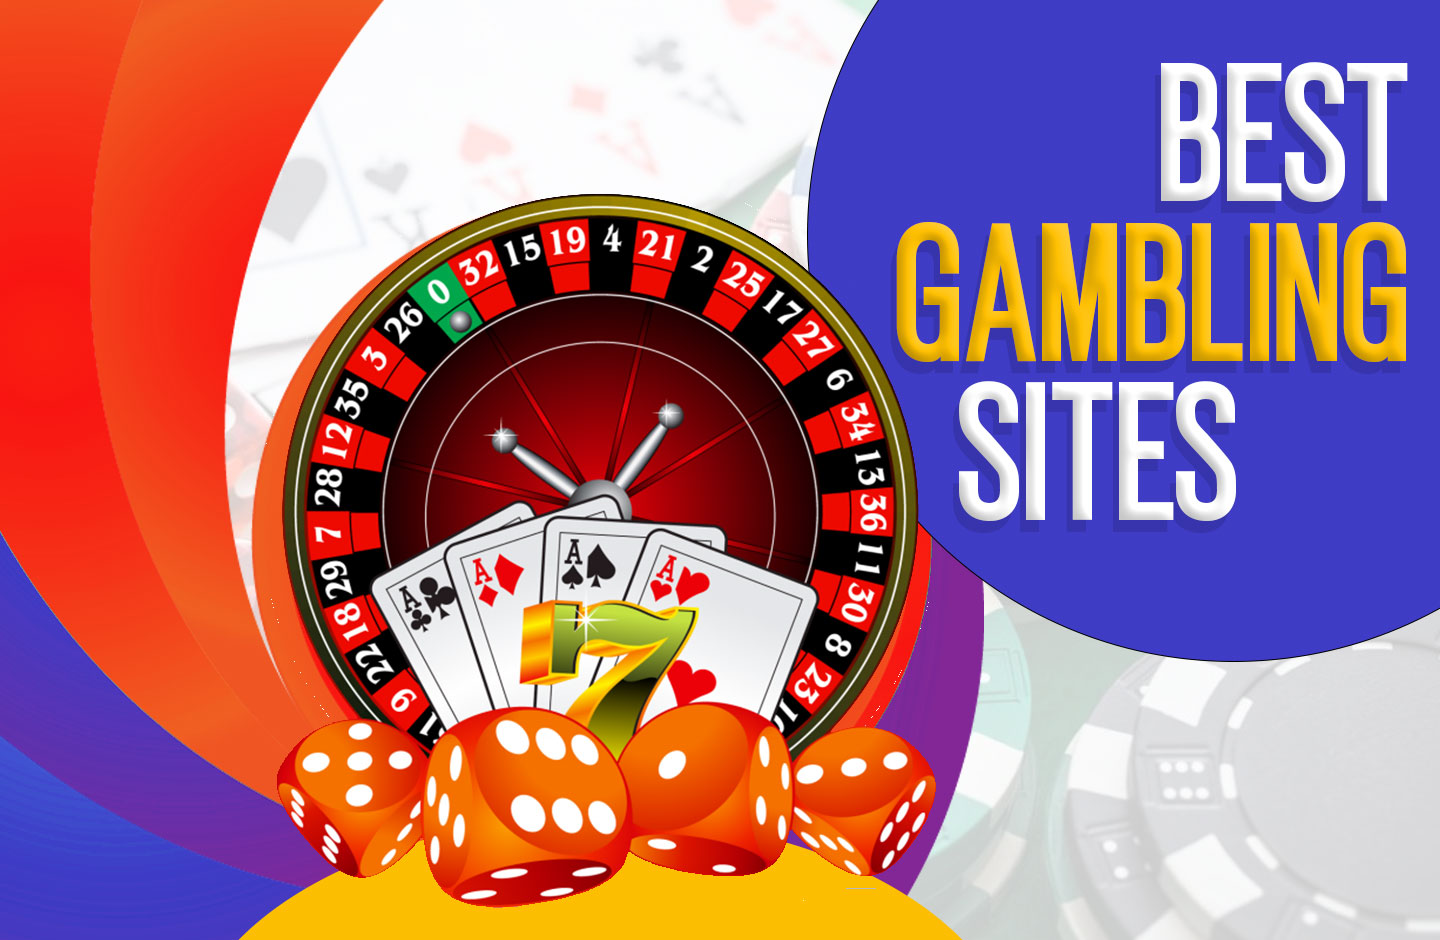 What Your Customers Really Think About Your online gambling sites?